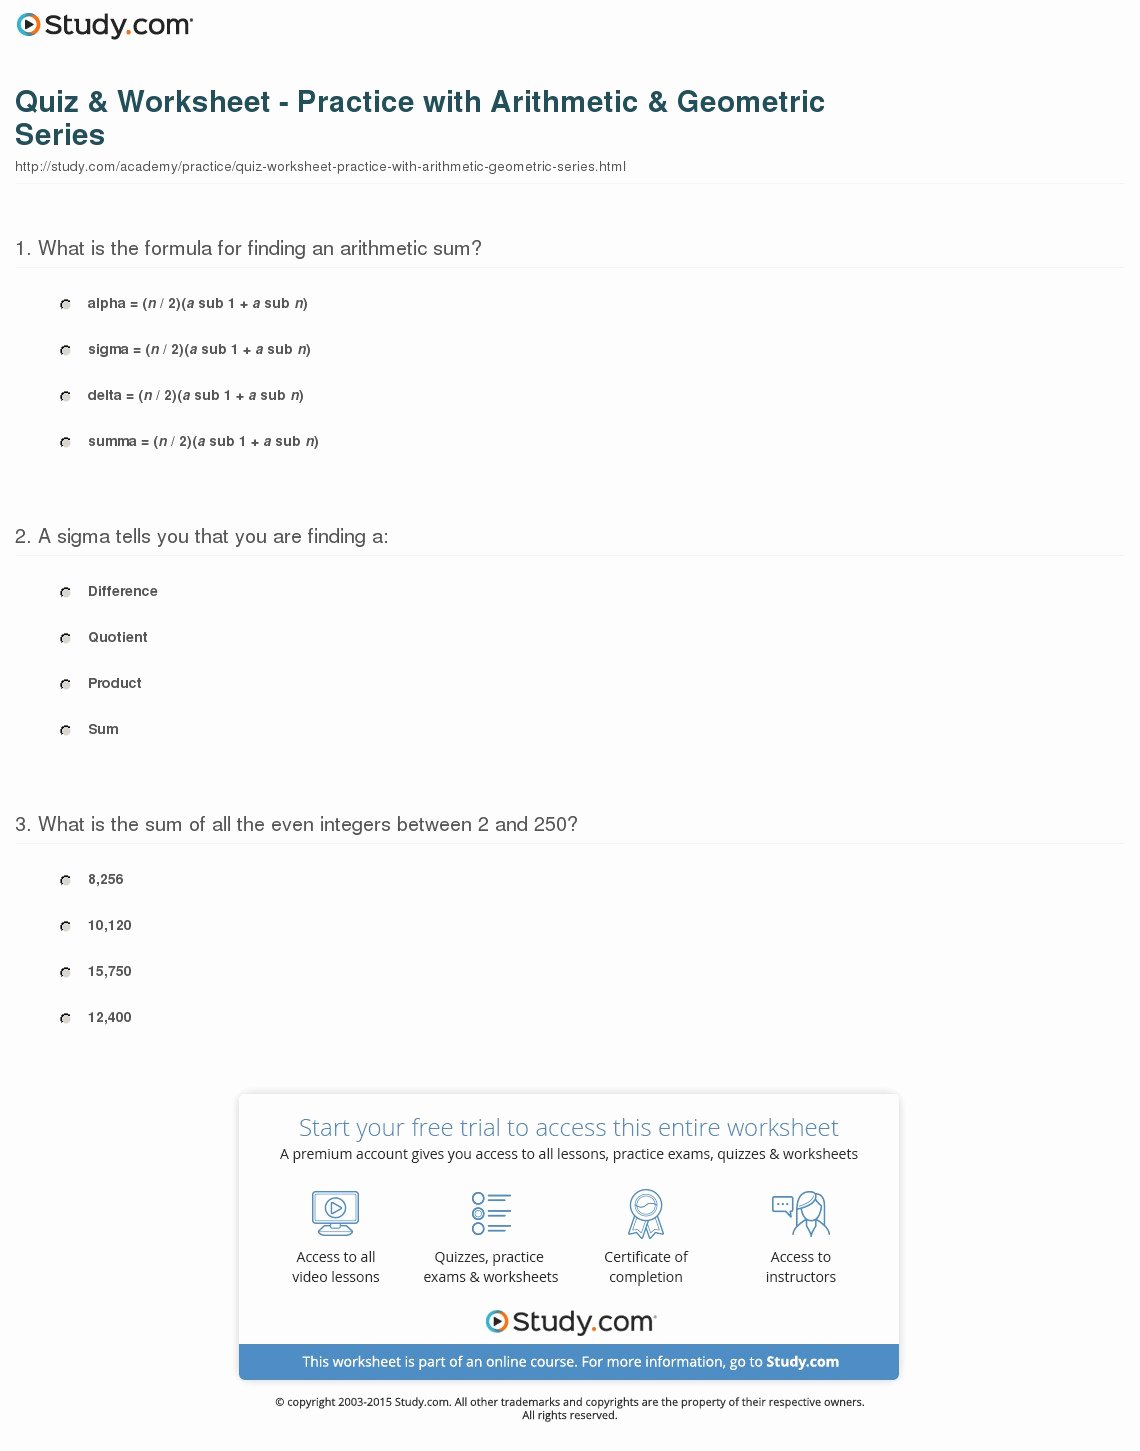 Geometric and Arithmetic Sequence Worksheet Elegant Quiz &amp; Worksheet Practice with Arithmetic &amp; Geometric